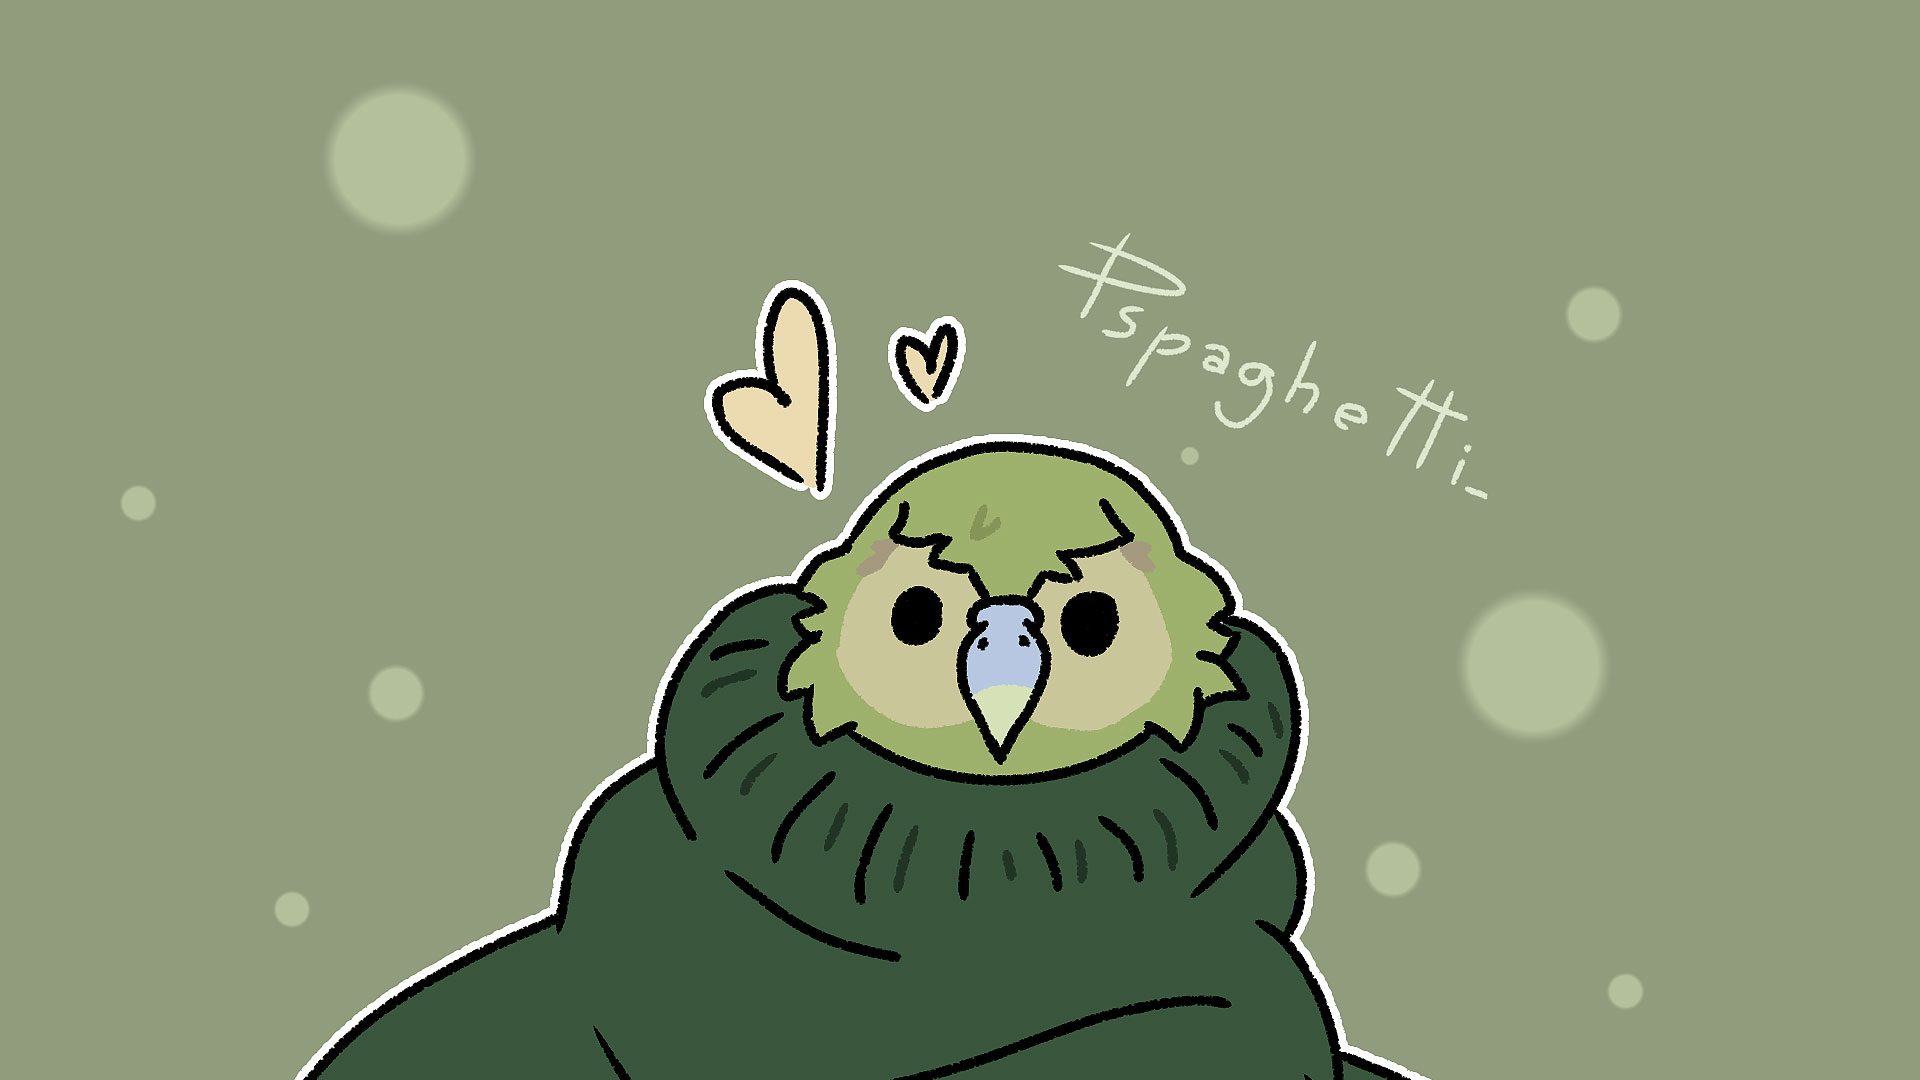 A green Kākāpō parrot buried in a green sweater. It's a parrot sweater artwork by Spaghetti Eyes.